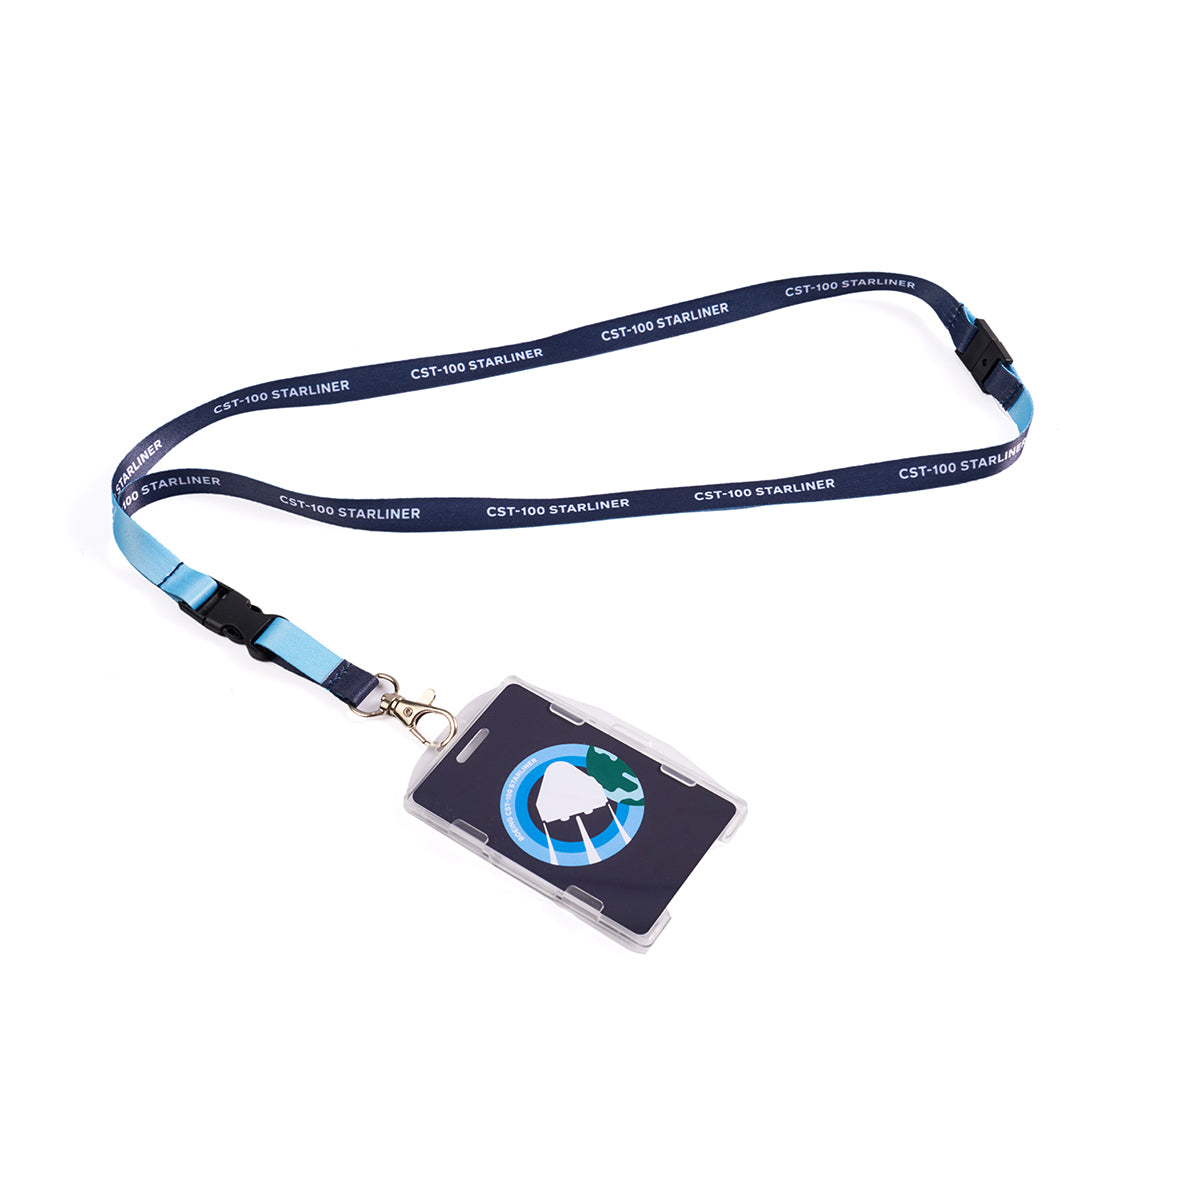 Full product image of the lanyard in blue and light blue. Boeing CST-100 Starliner Skyward sublimation print. Full printed PVC card with Boeing CST-100 Starliner Skyward roundel design.